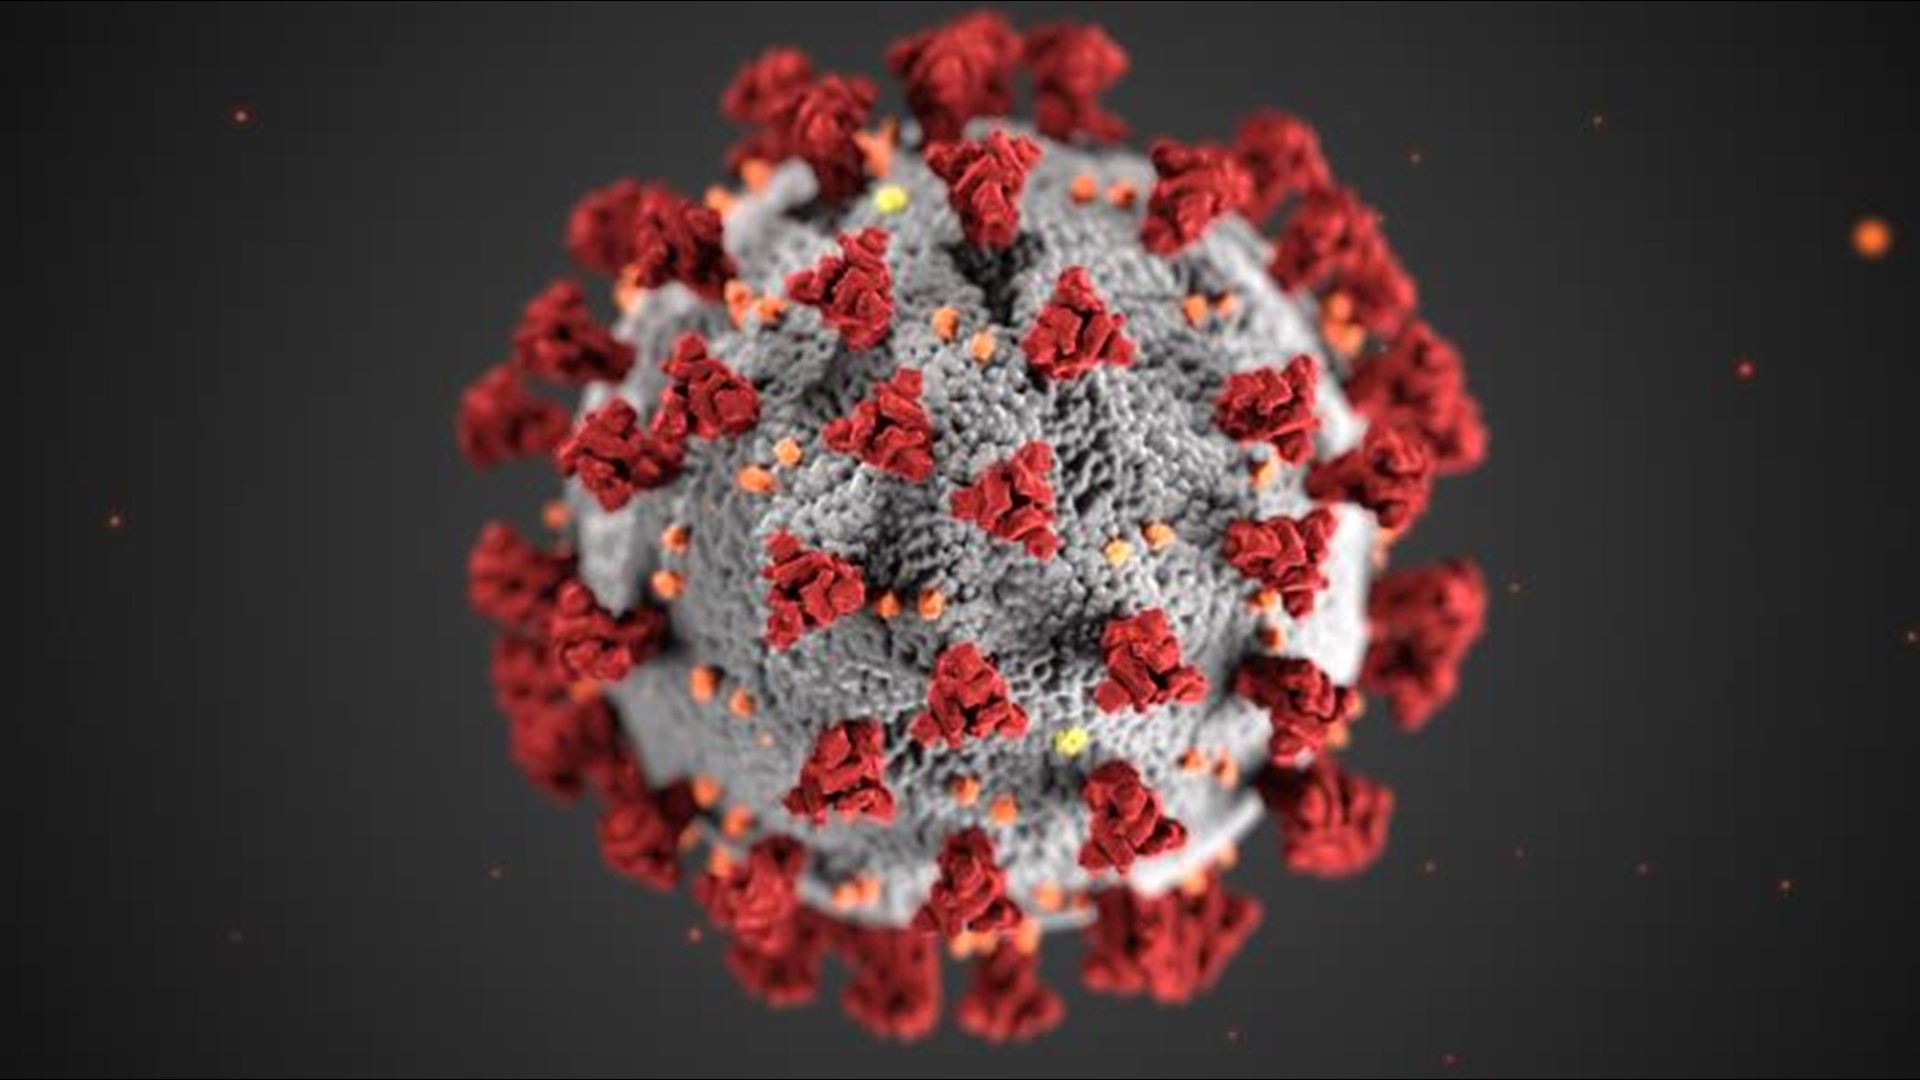 The CDC said it has ramped up analysis of the new virus strain after cases have started popping up in the U.S.